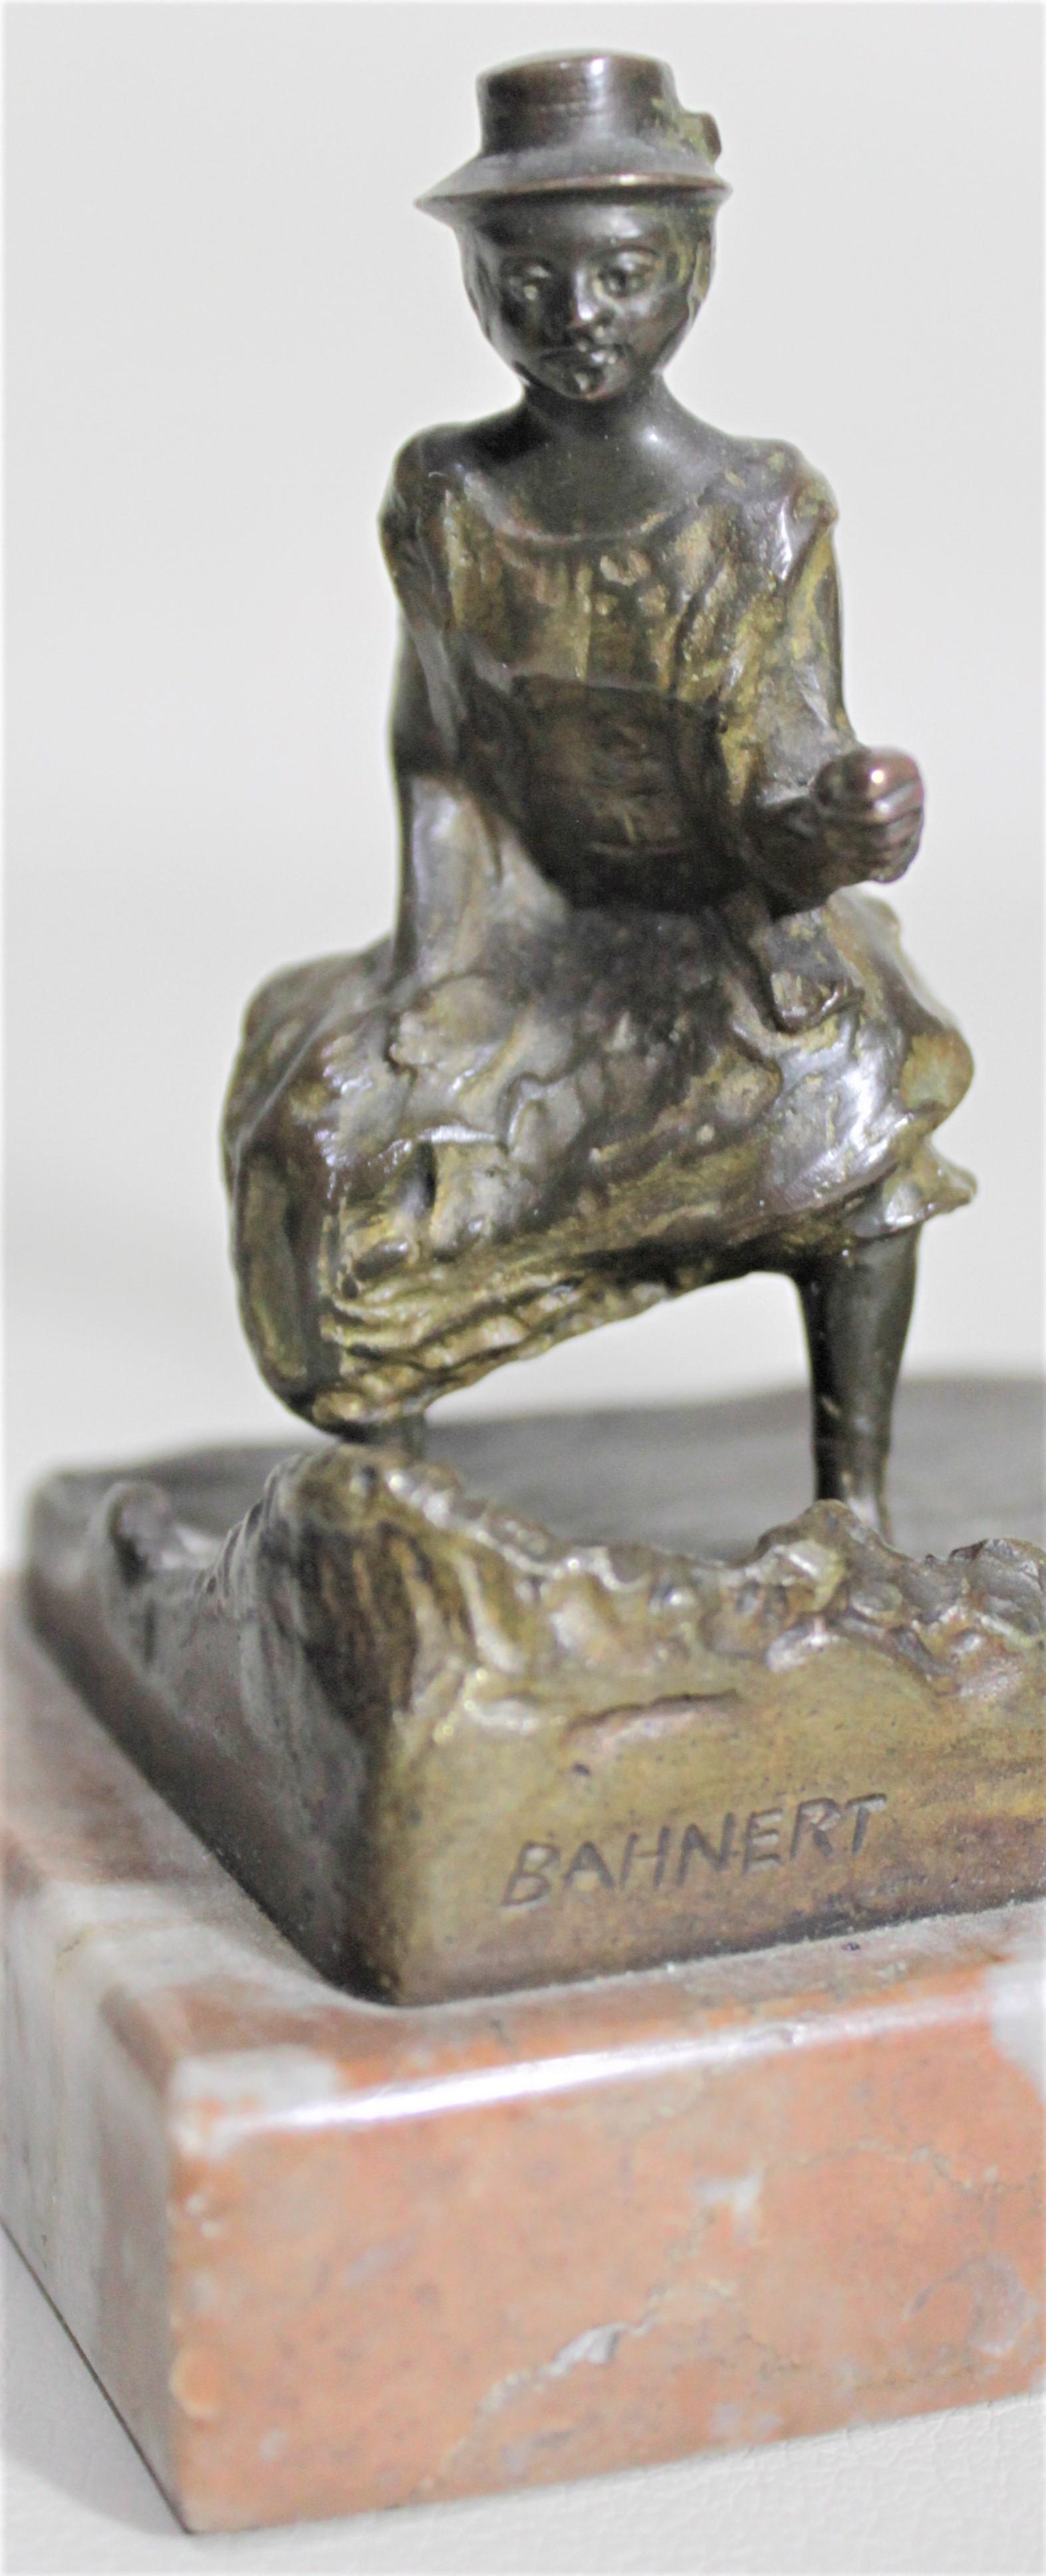 Late Victorian Antique Signed Bahnert French Erotic Articulated Cast Bronze Sculpture For Sale